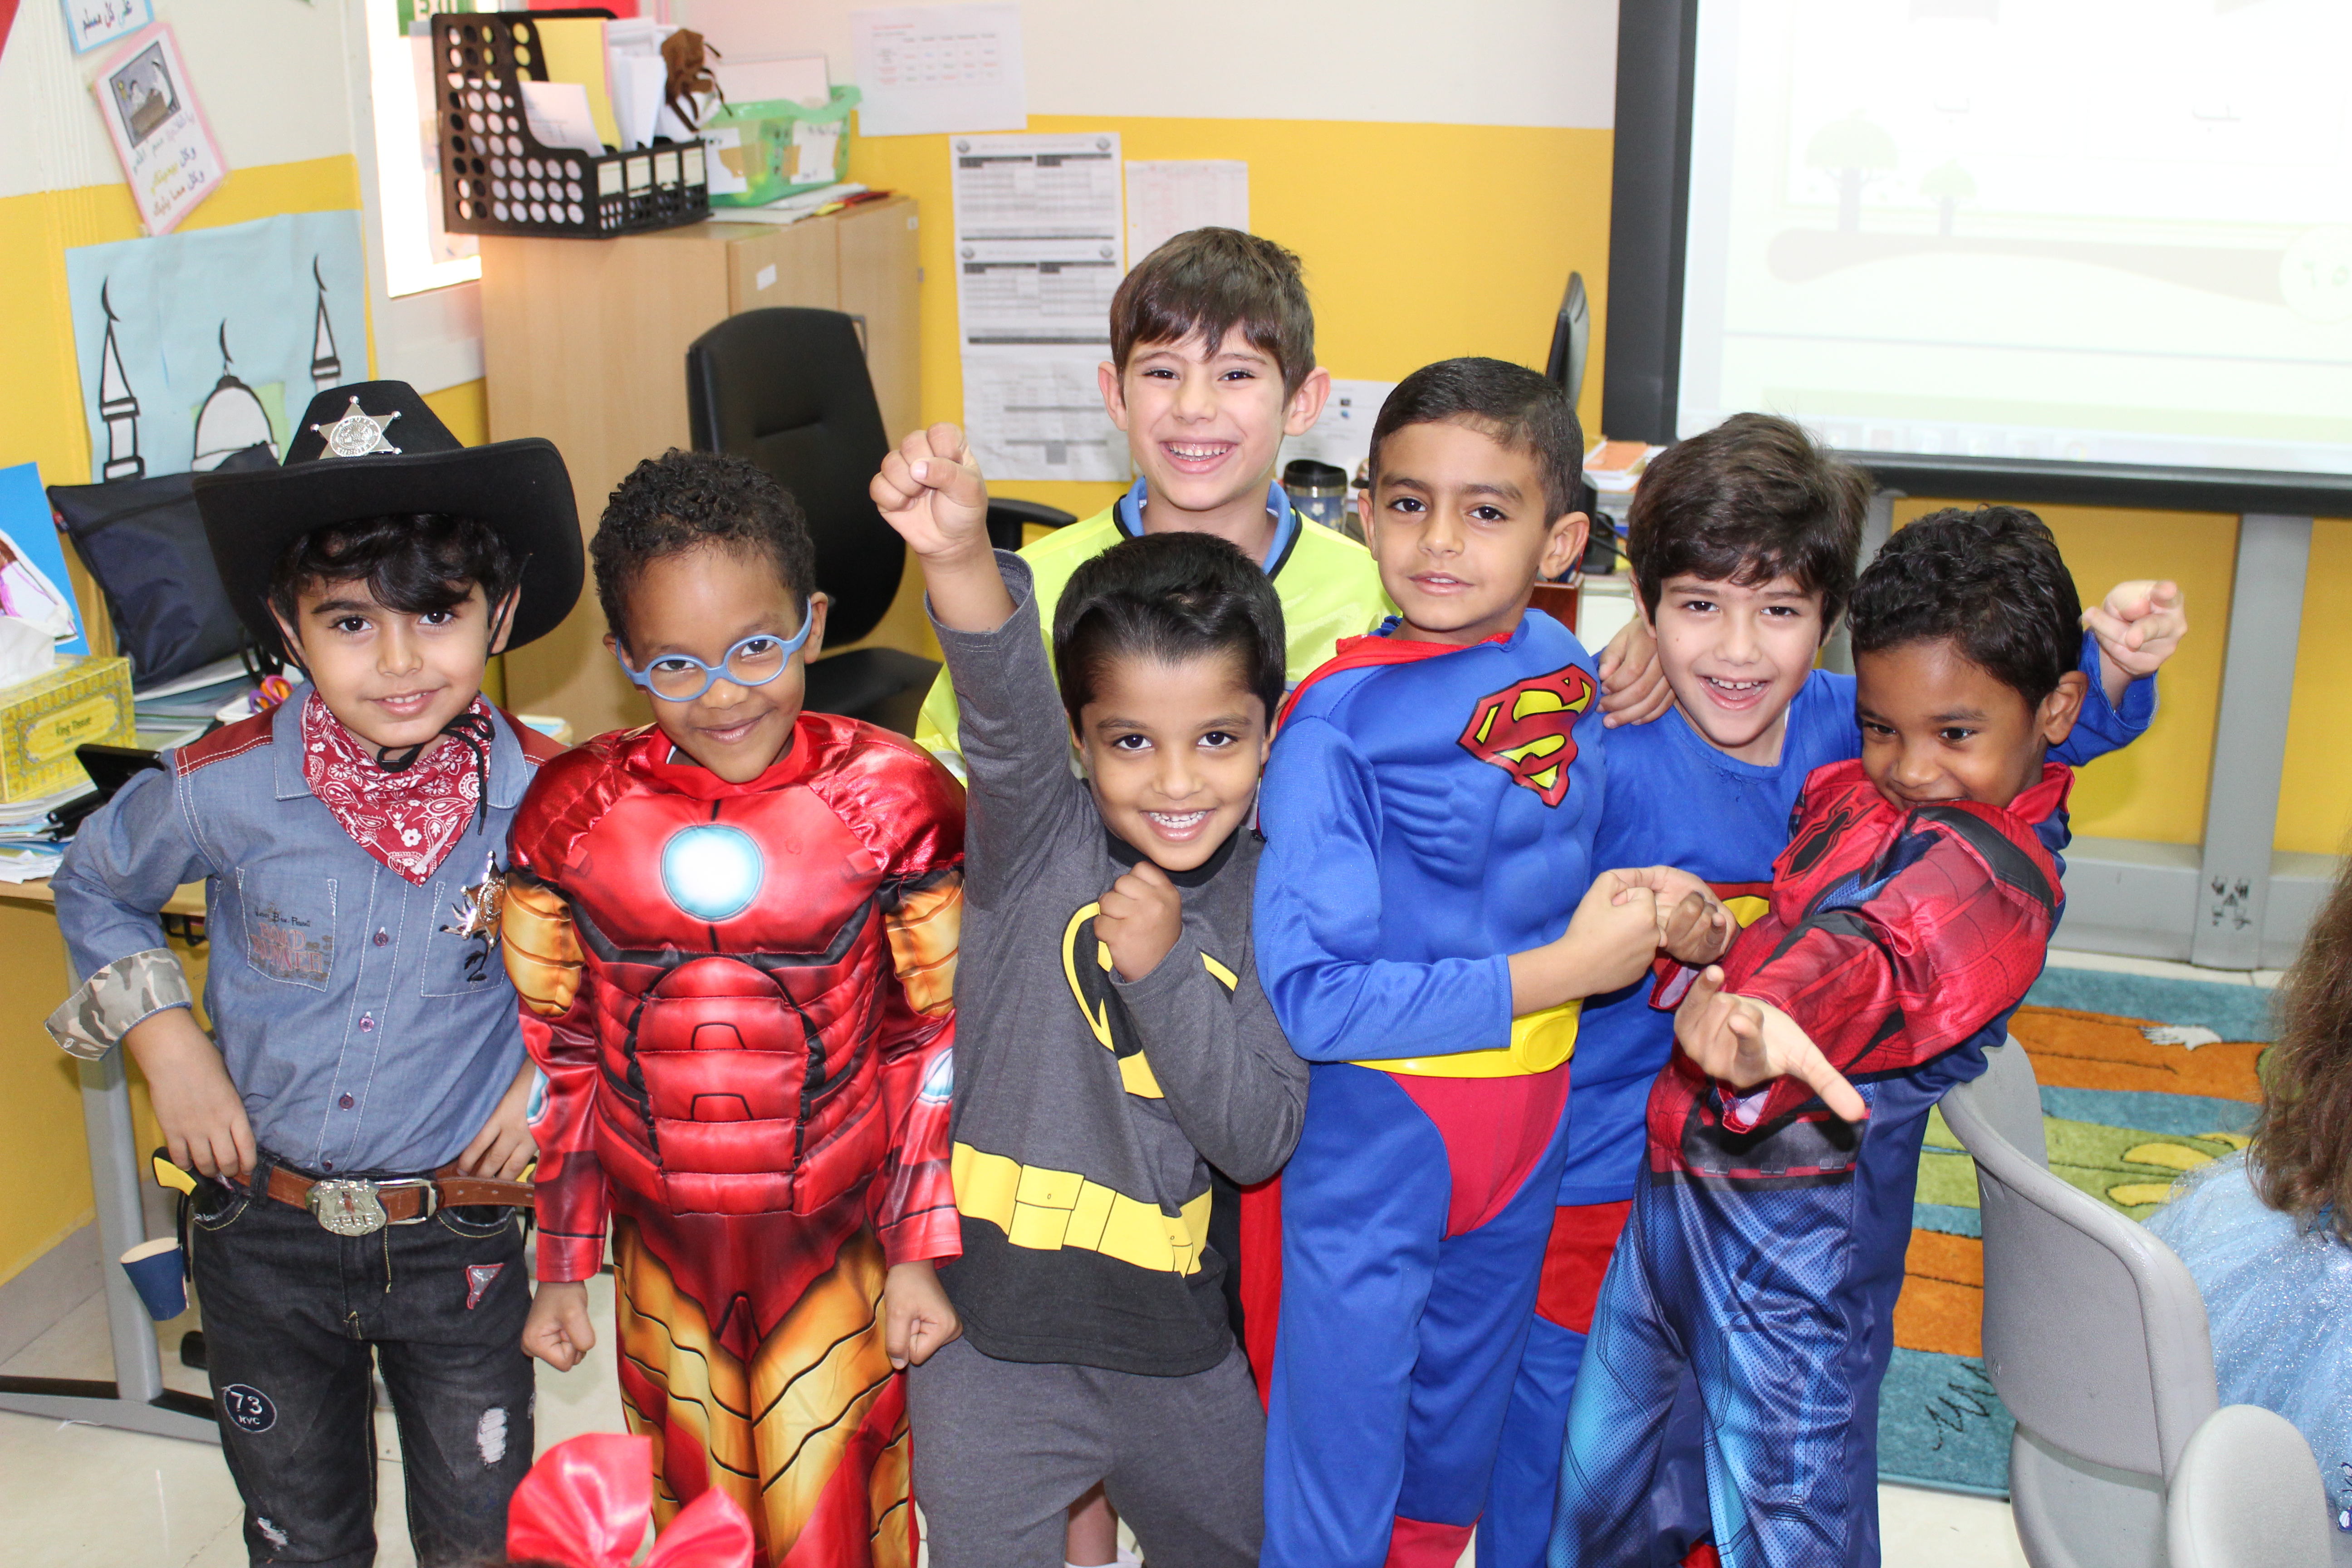 Students dressed up for fictional character Day